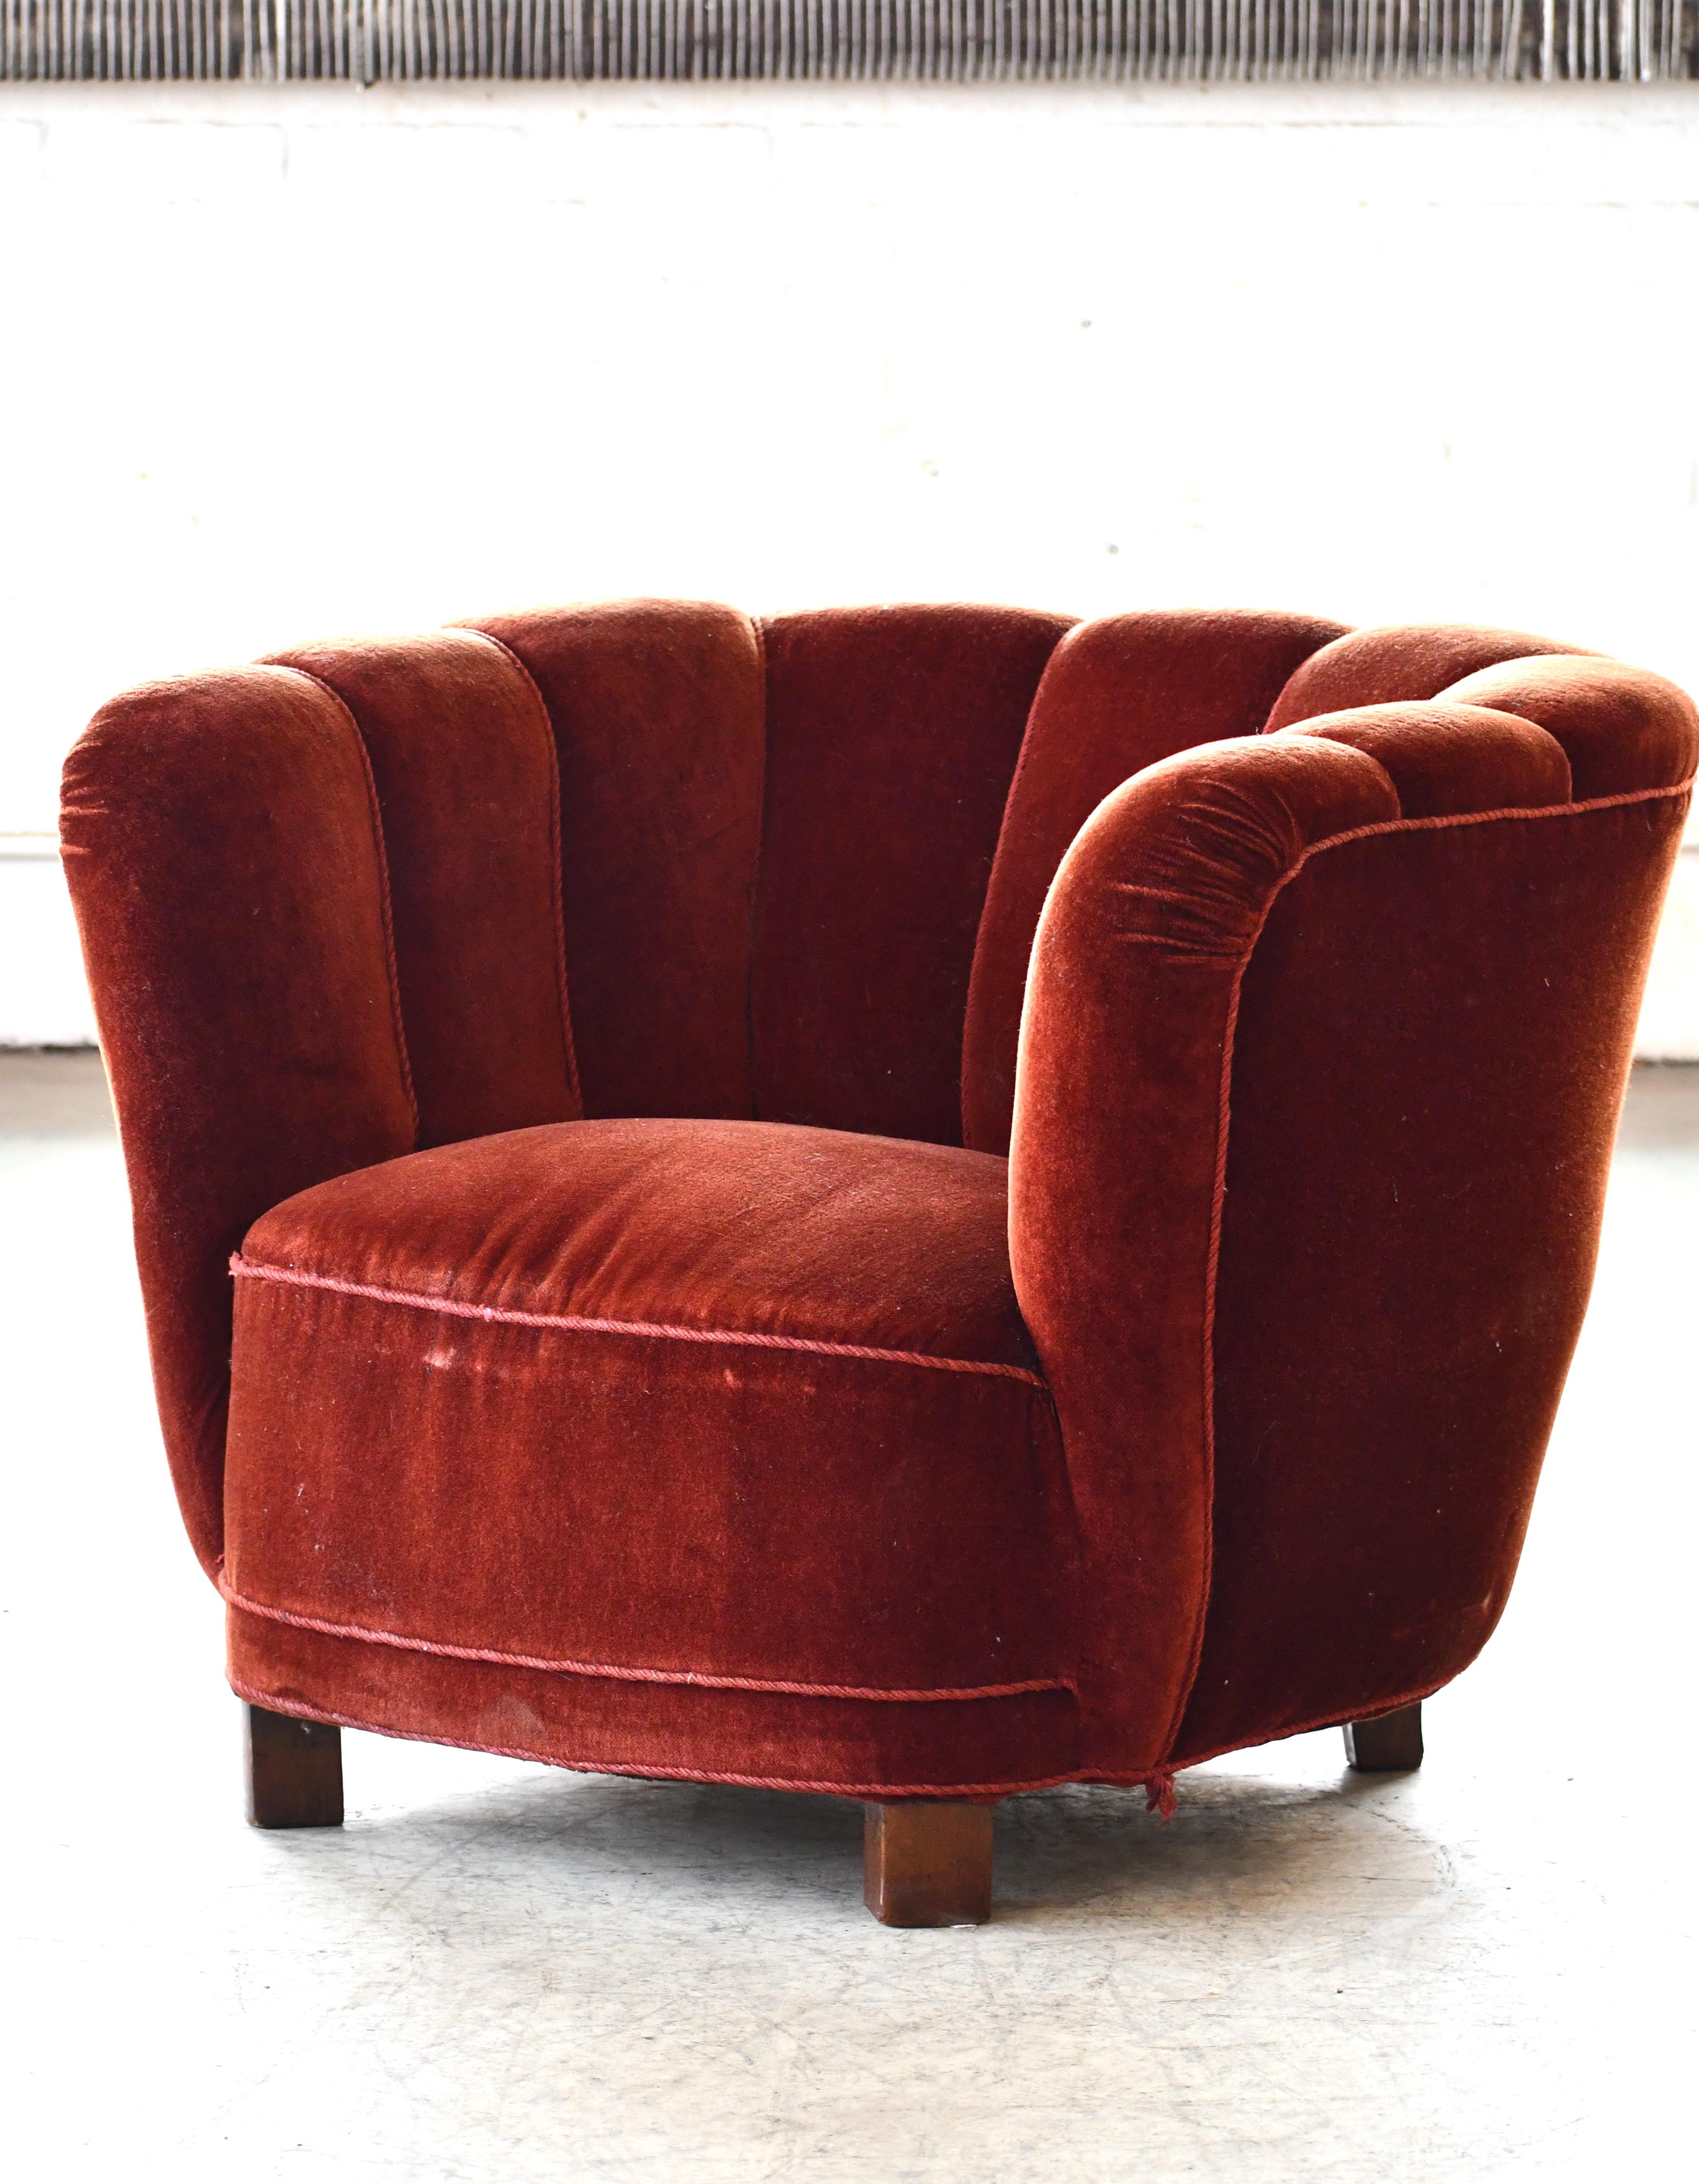 Danish 1940s Banana Style Curved Tub Club Chair with Channel Back in Red Mohair In Good Condition For Sale In Bridgeport, CT